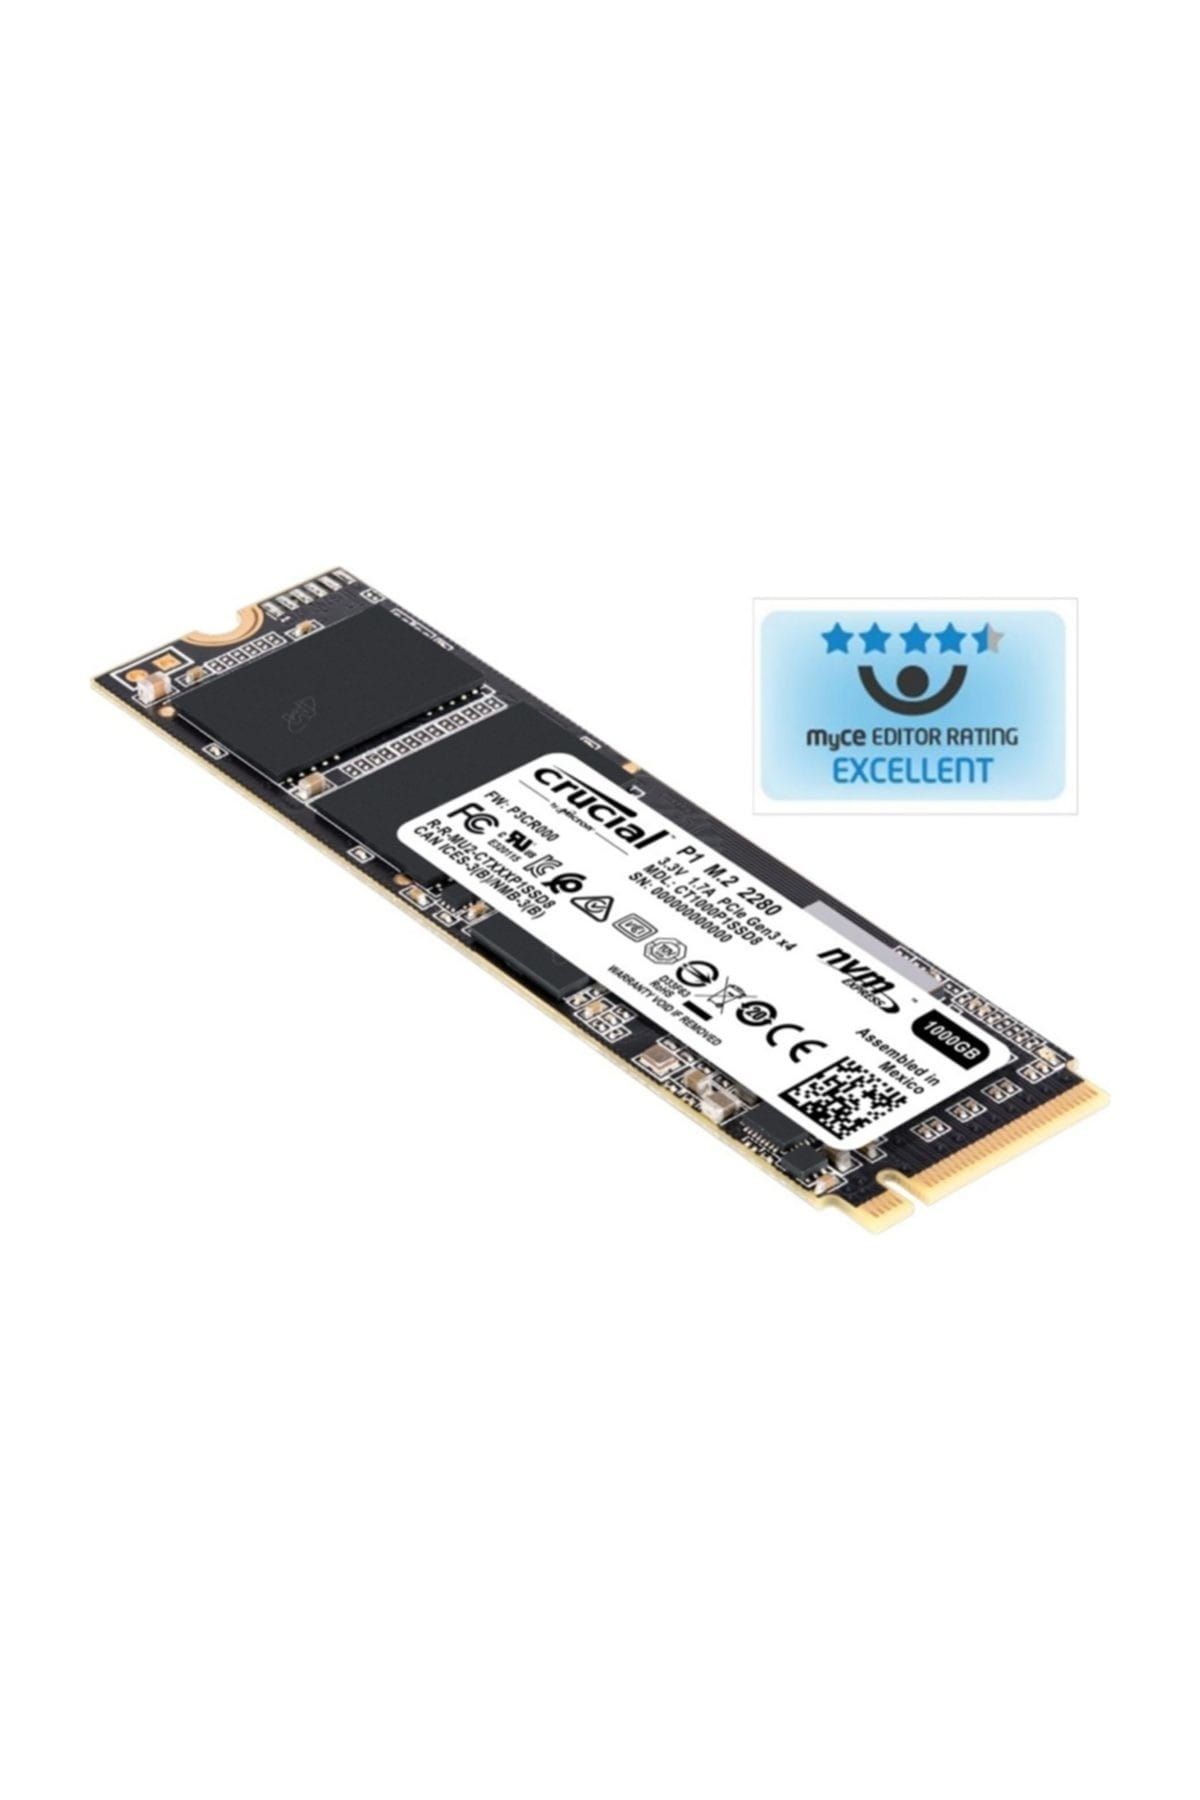 Crucial P1 500GB NVMe M.2 SSD Disk CT500P1SSD8